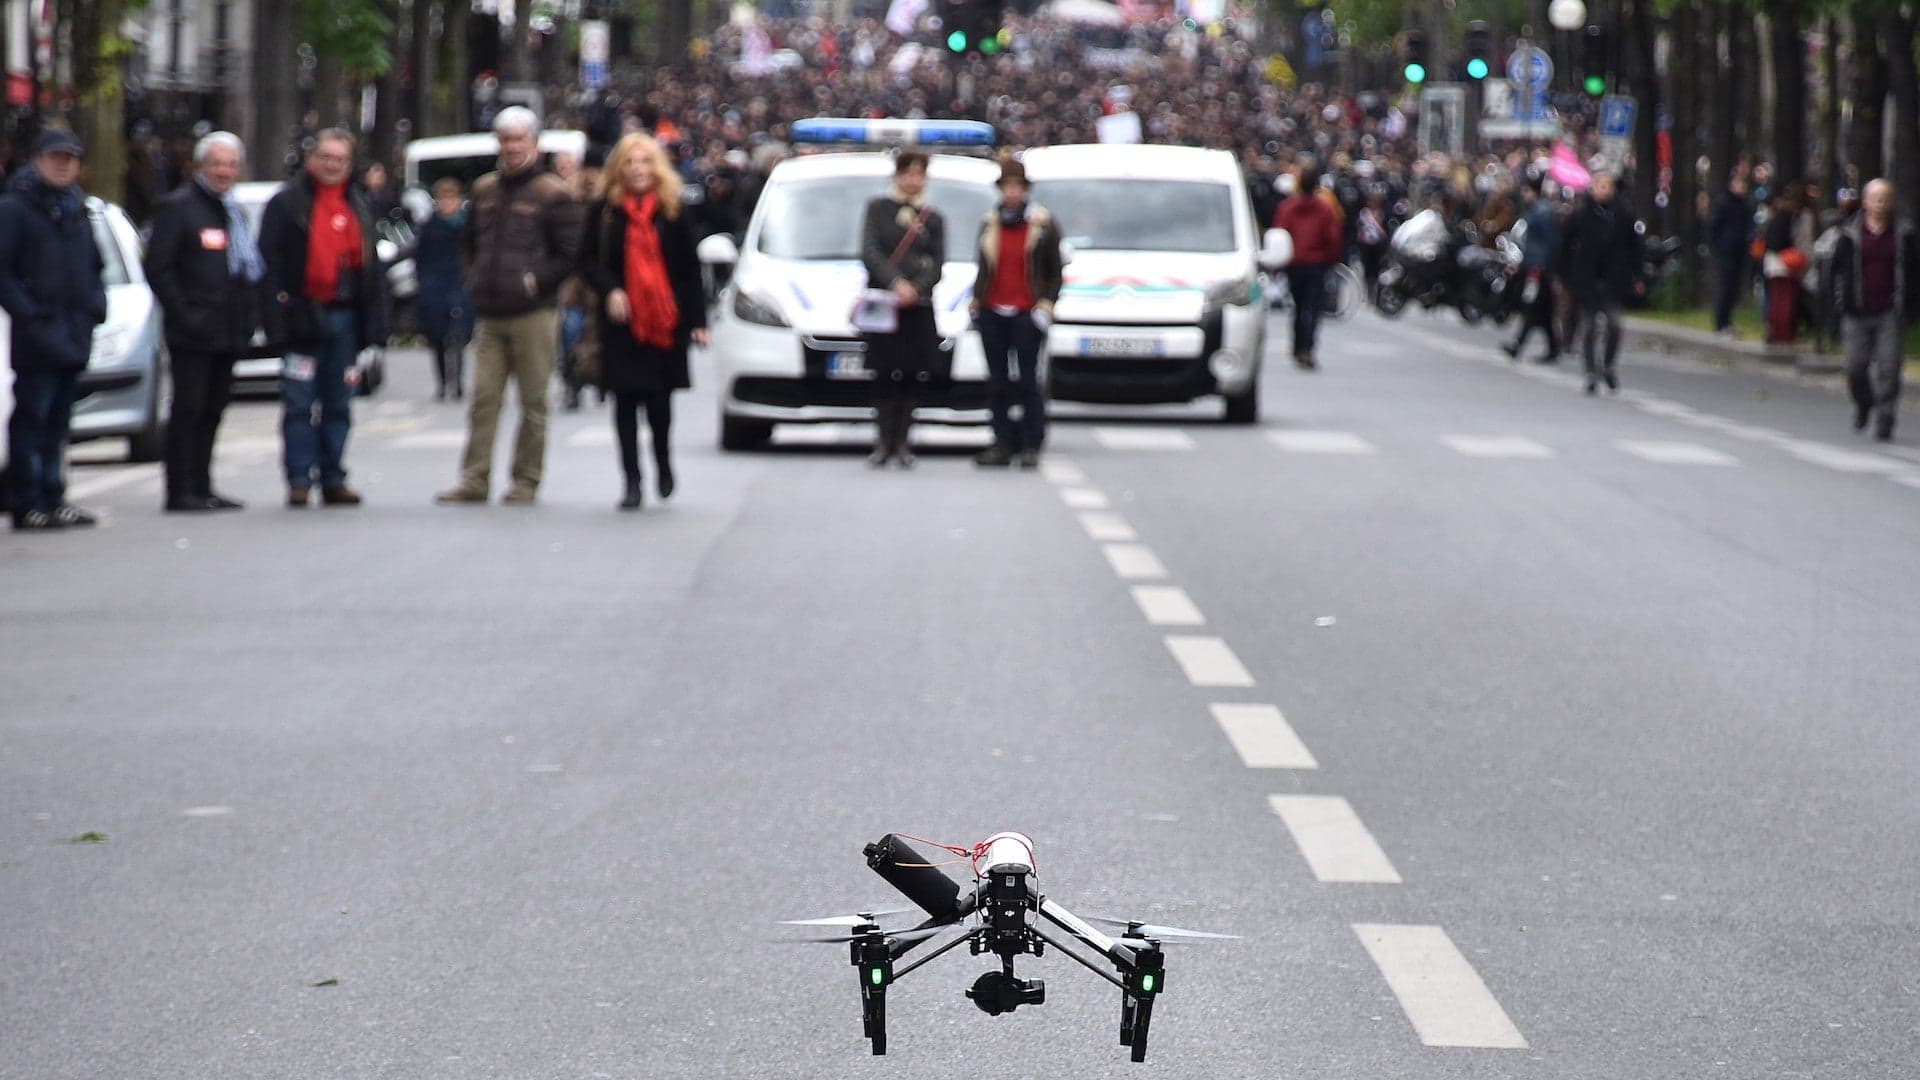 ACLU Worried That Face-Recognizing Drones Could Single out Trump Protesters